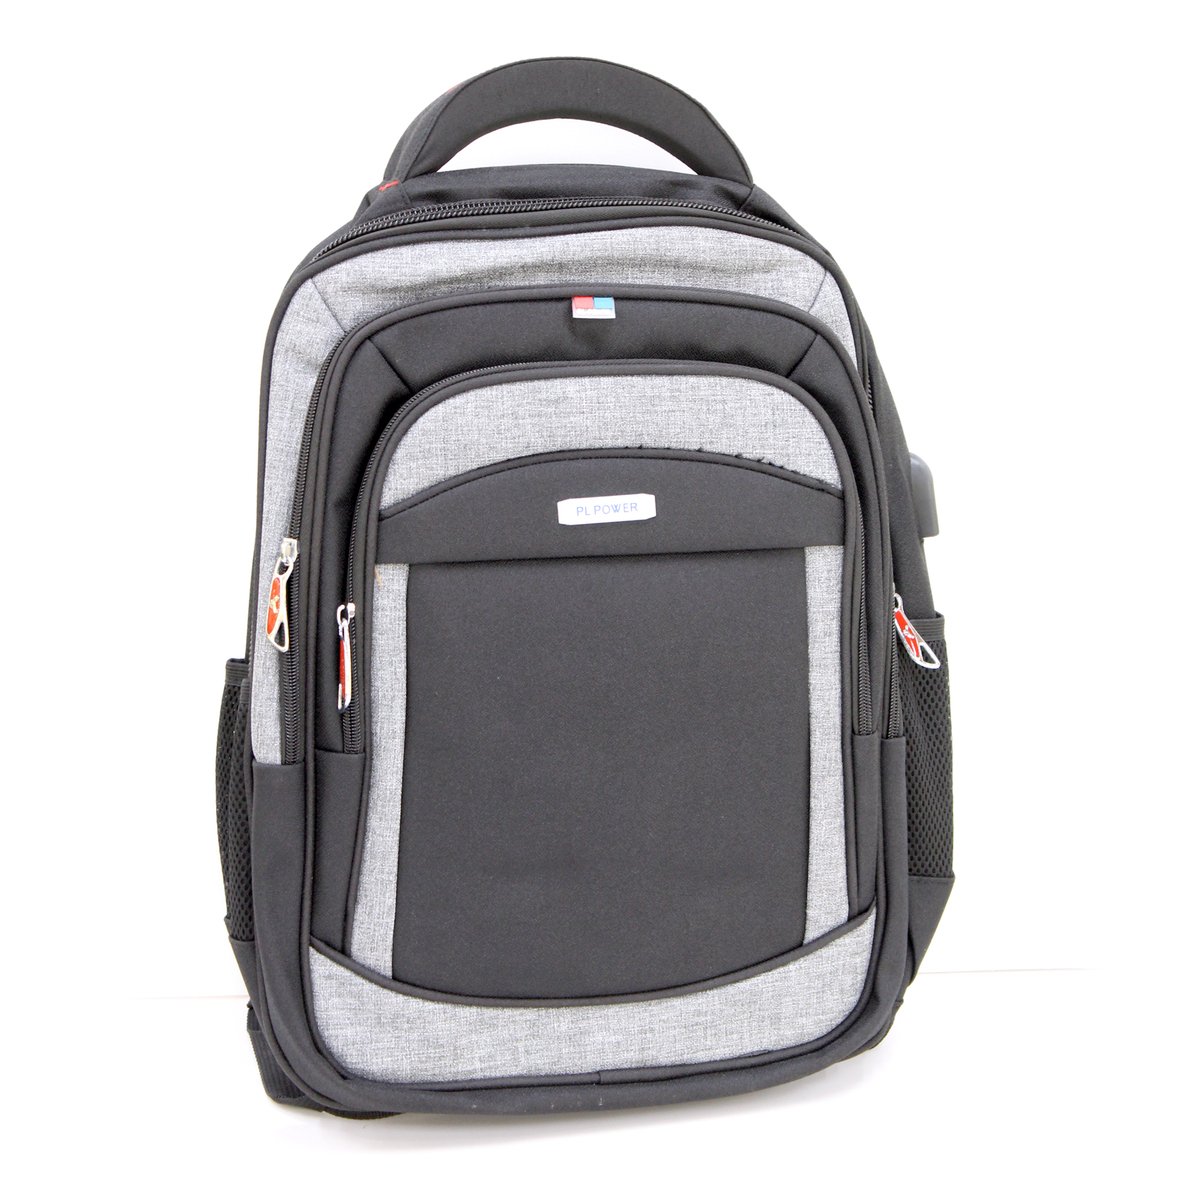 Win Plus Backpack 4621-6